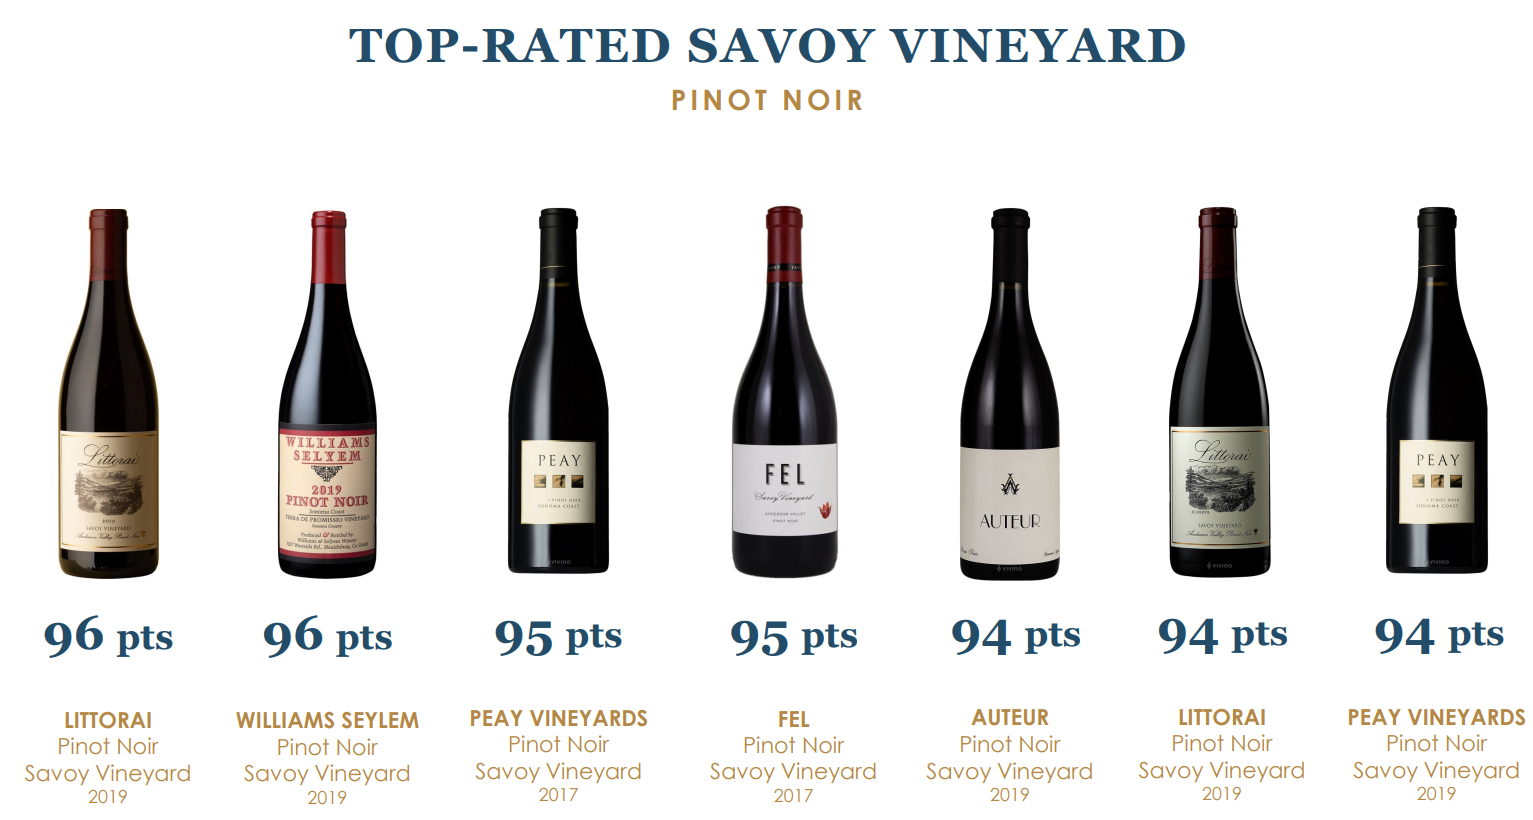 Top-Rated Pinot Noir from Anderson Valley’s Savoy Vineyard